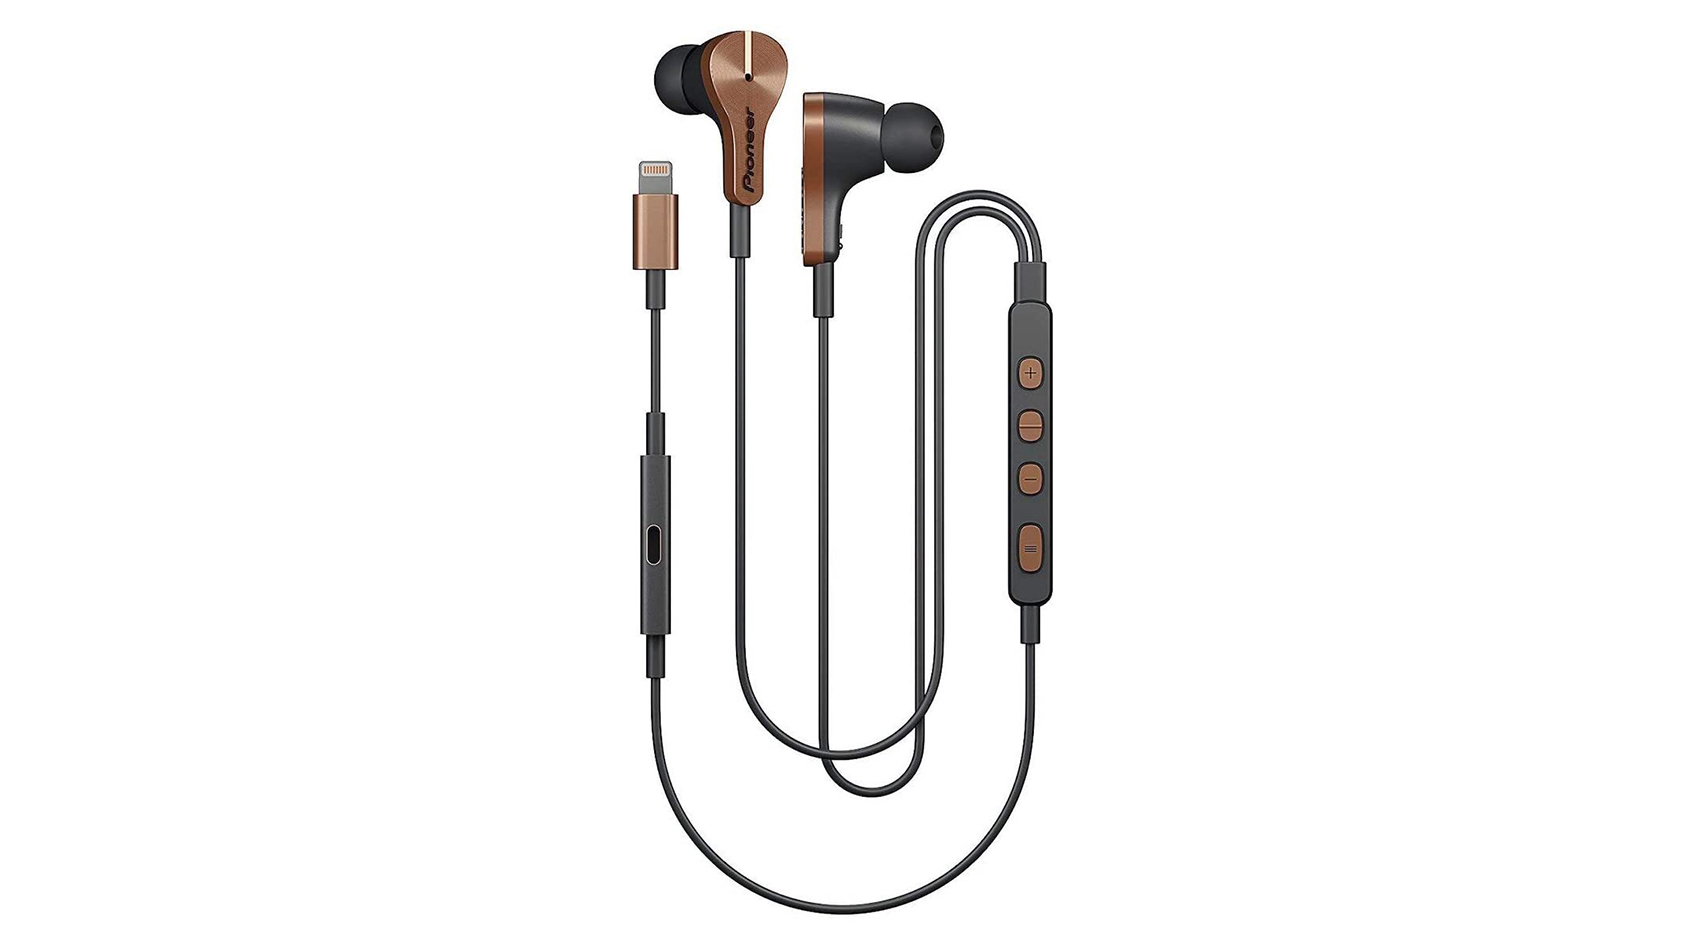 The Pioneer Rayz Plus Lightning earbuds in copper against a white background.